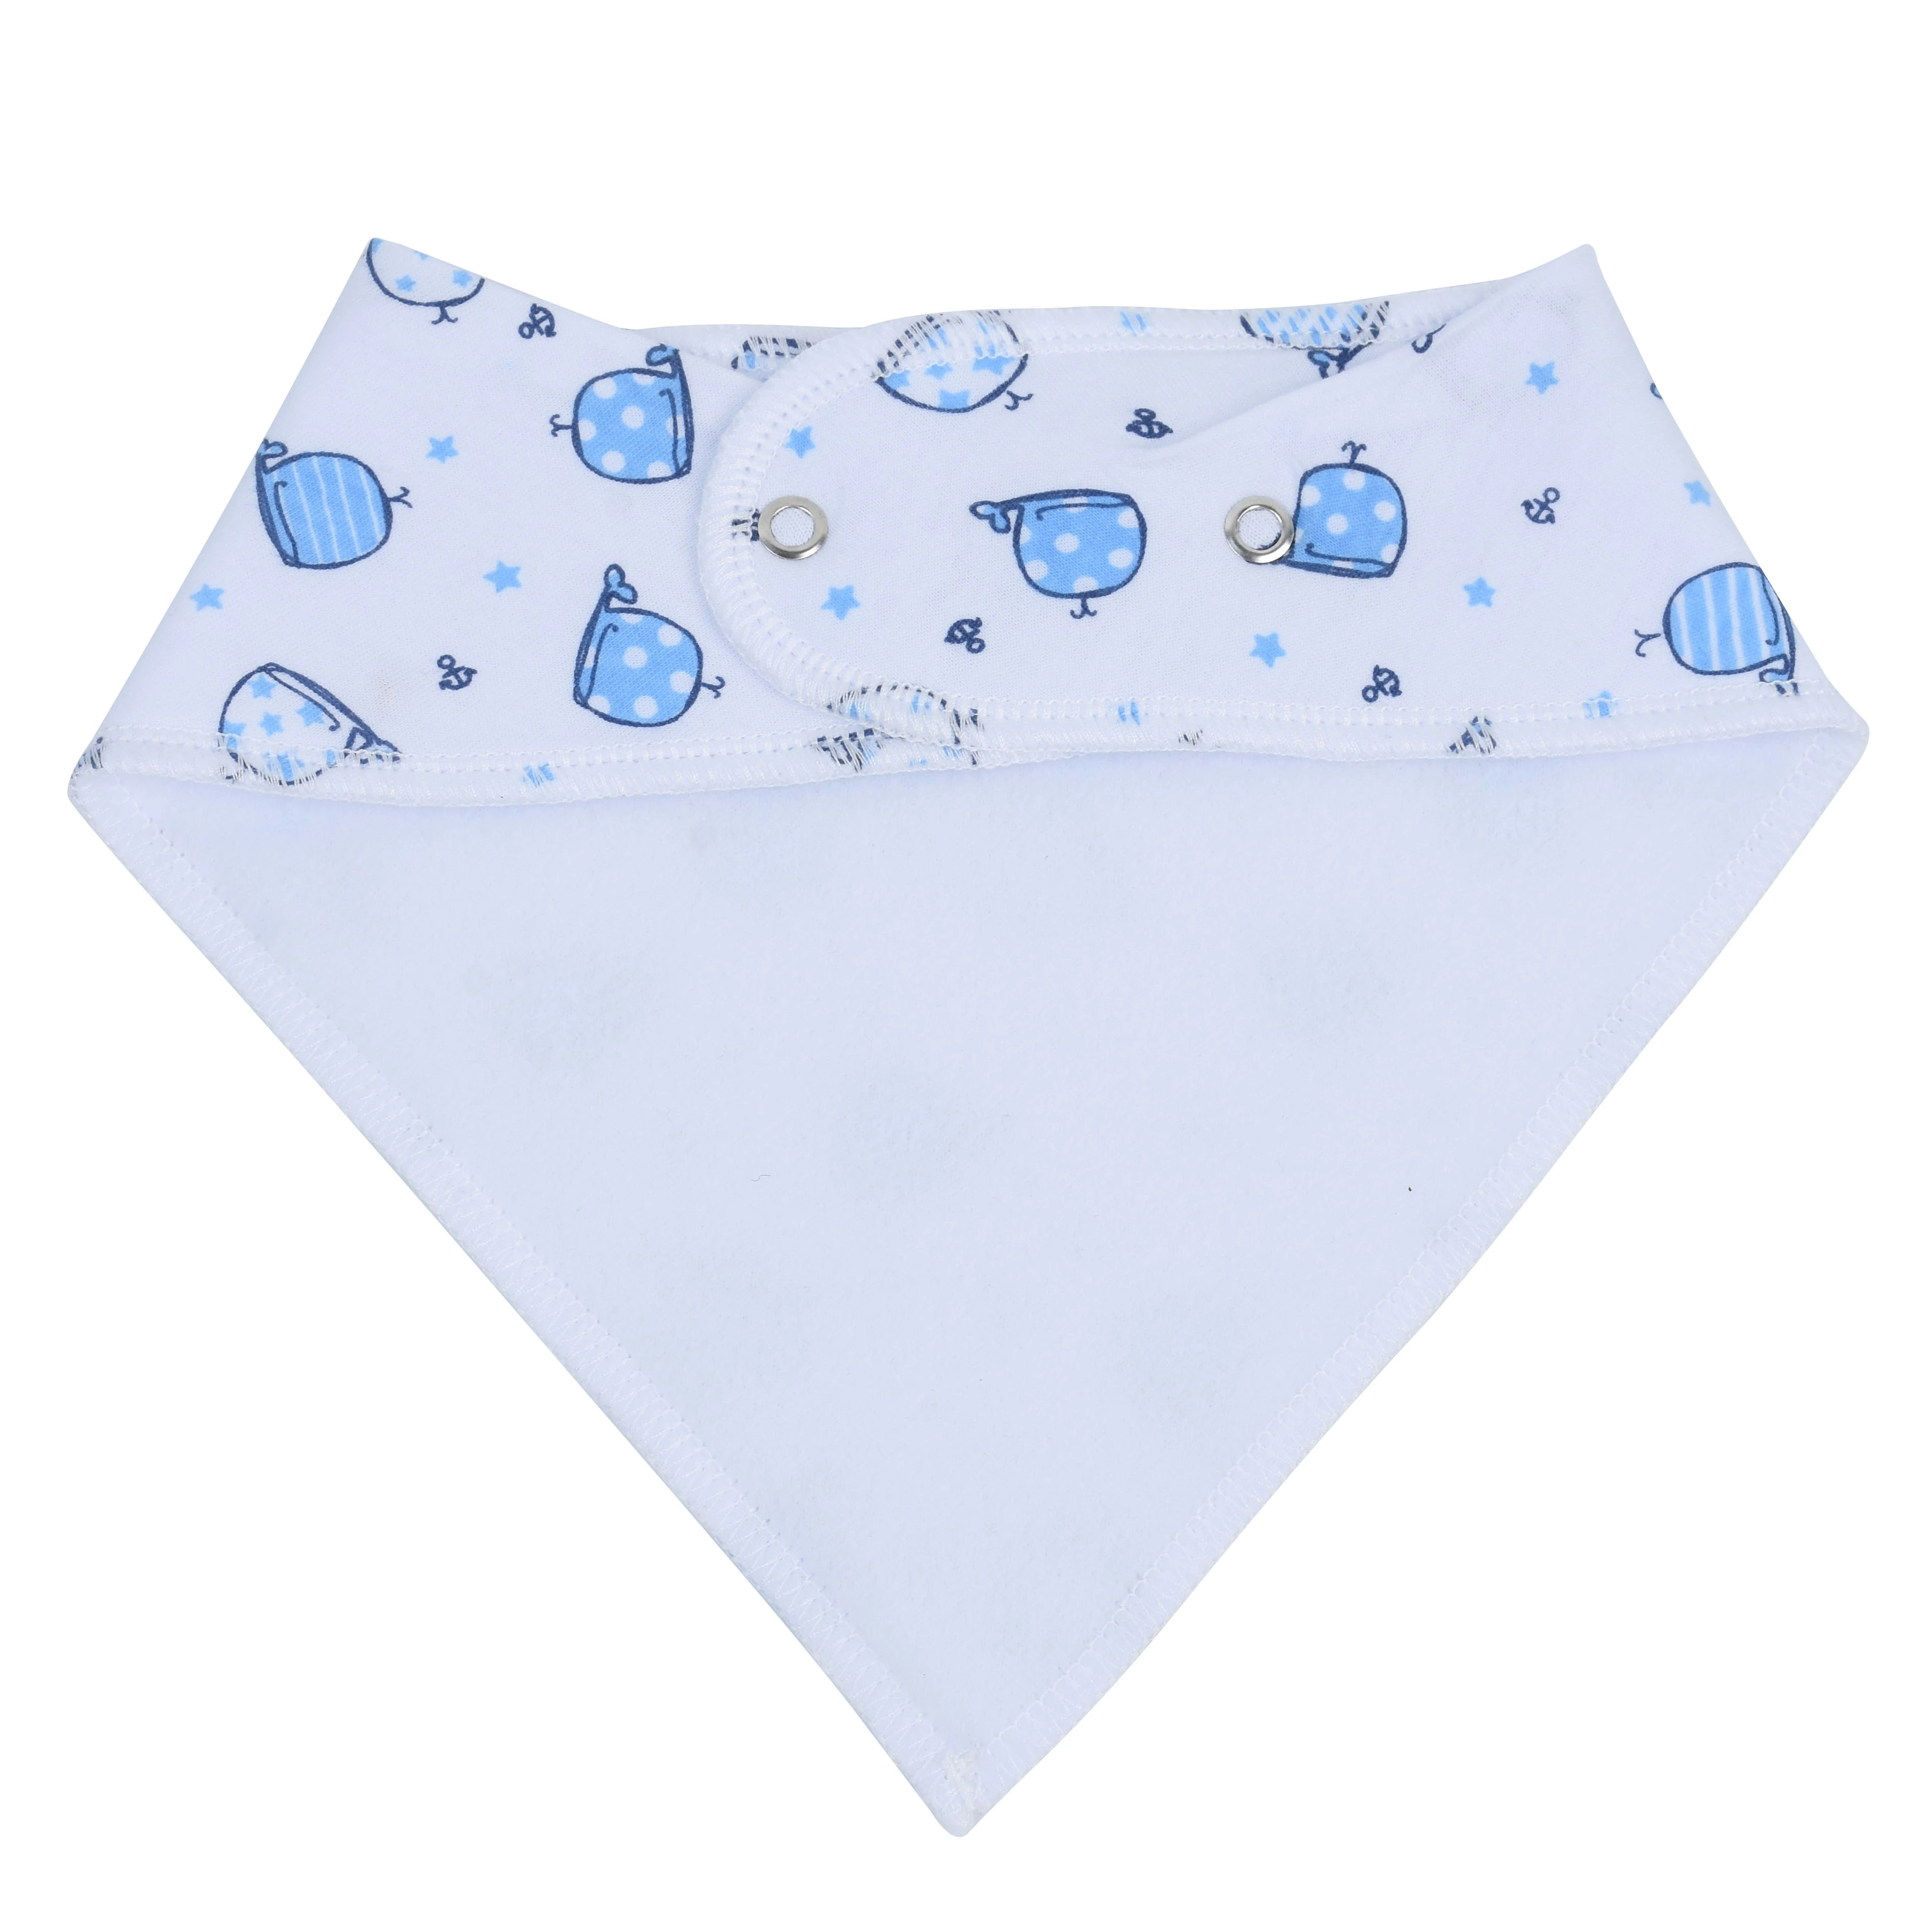 Colorful Wave Low Moq New design Baby Bibs for Boys and Girls Unisex Bandana Drool Bibs